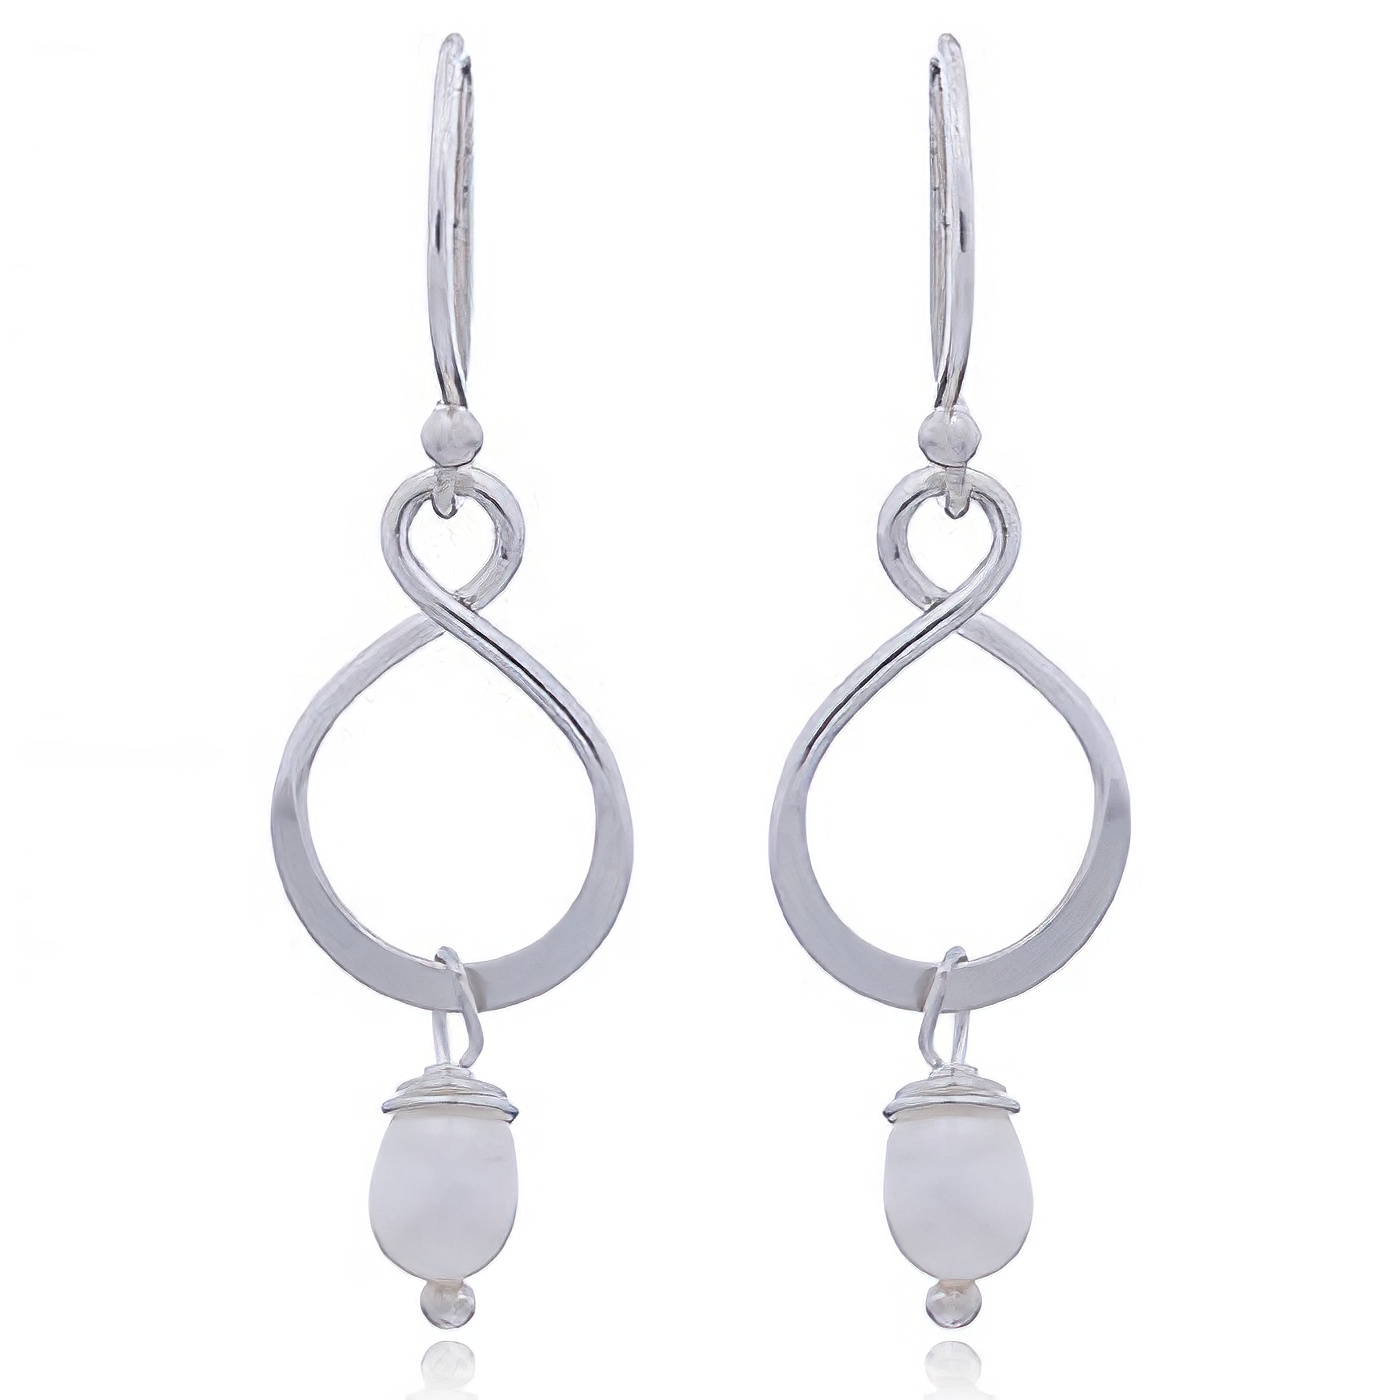 Sterling Silver Infinity Dangle Earrings with Freshwater Pearls by BeYindi 